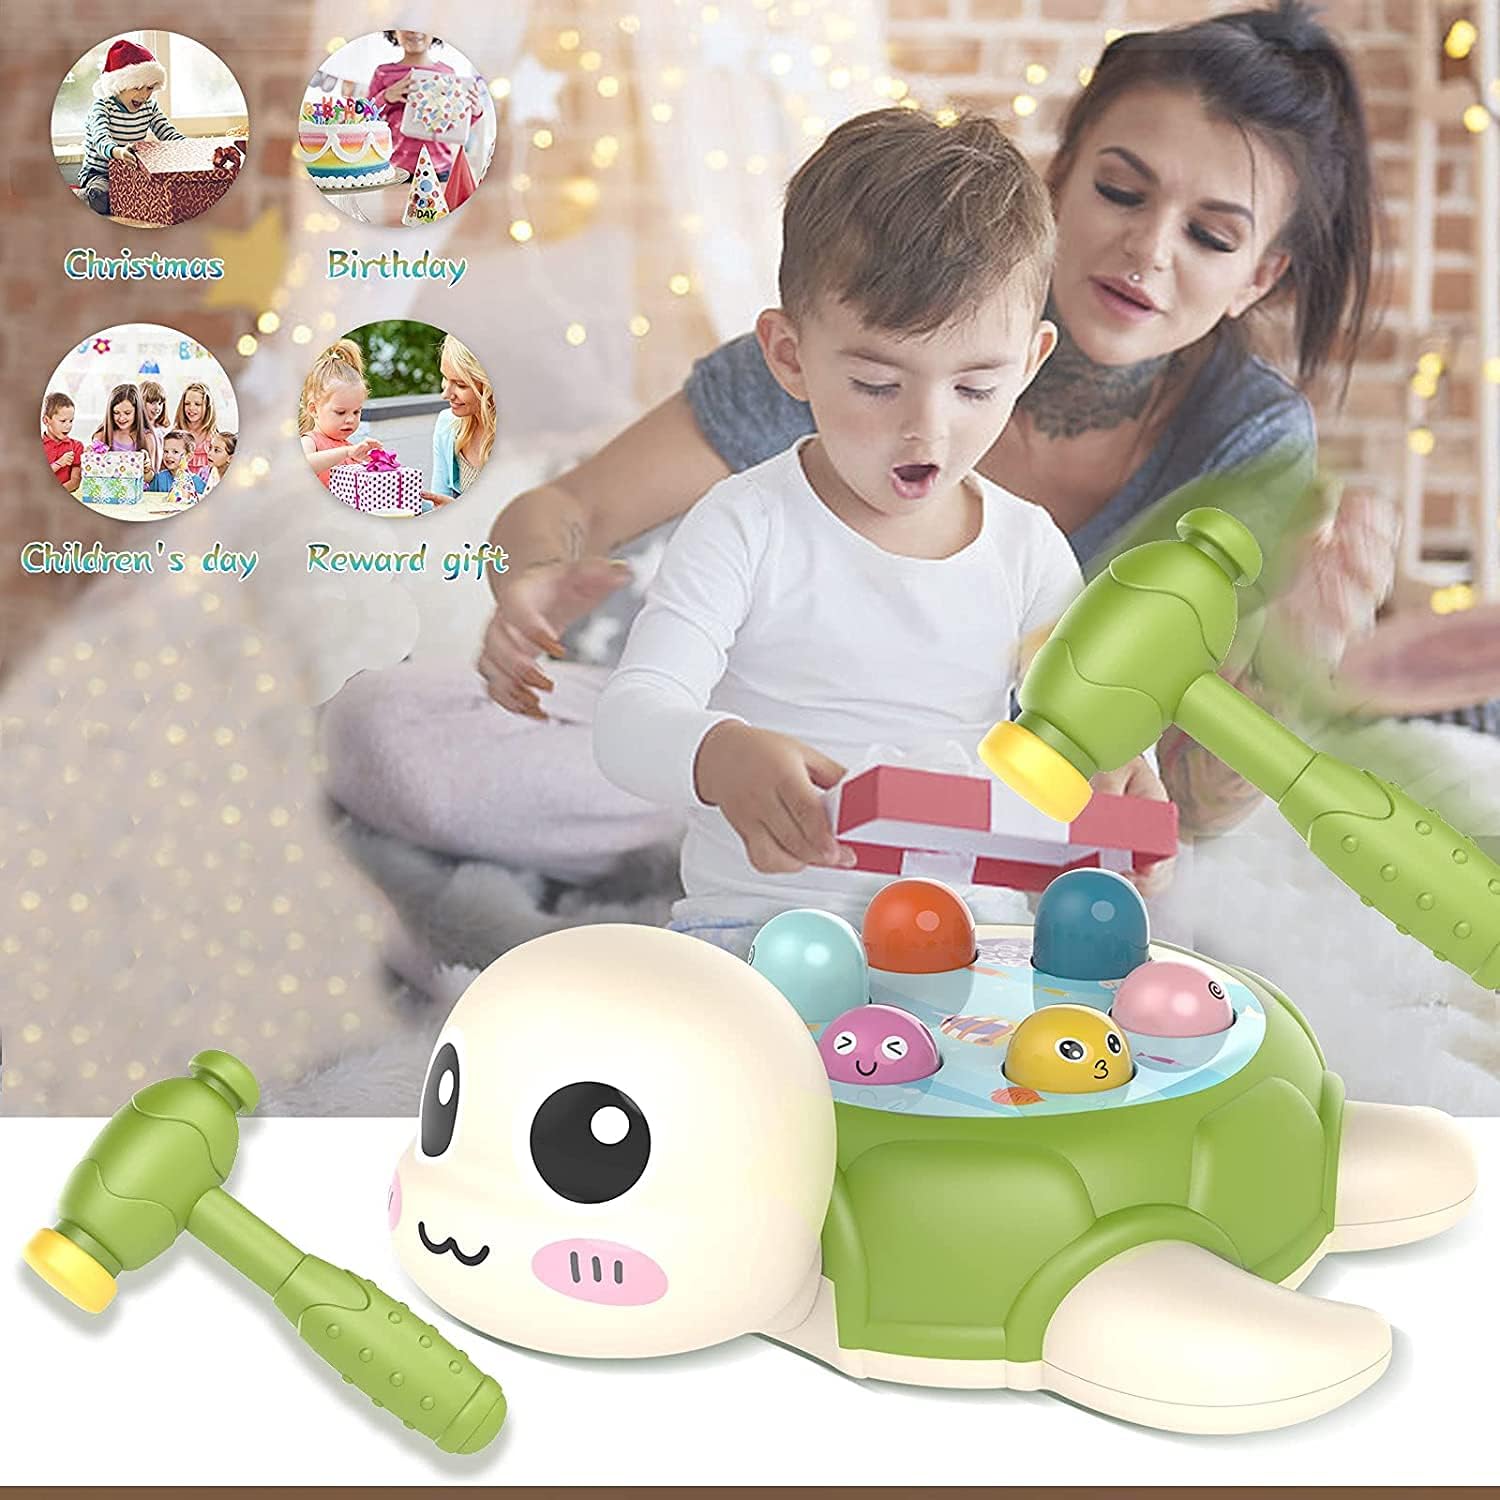 DMG Hammering and Pounding Toy,Toys for 3 4 5 6 Year Old Boys,Baby Interactive Toys Toddler Activities Games with 1 Hammer,Learning,Active,Early Educational Toy,Gift for Boys Girls Toddlers